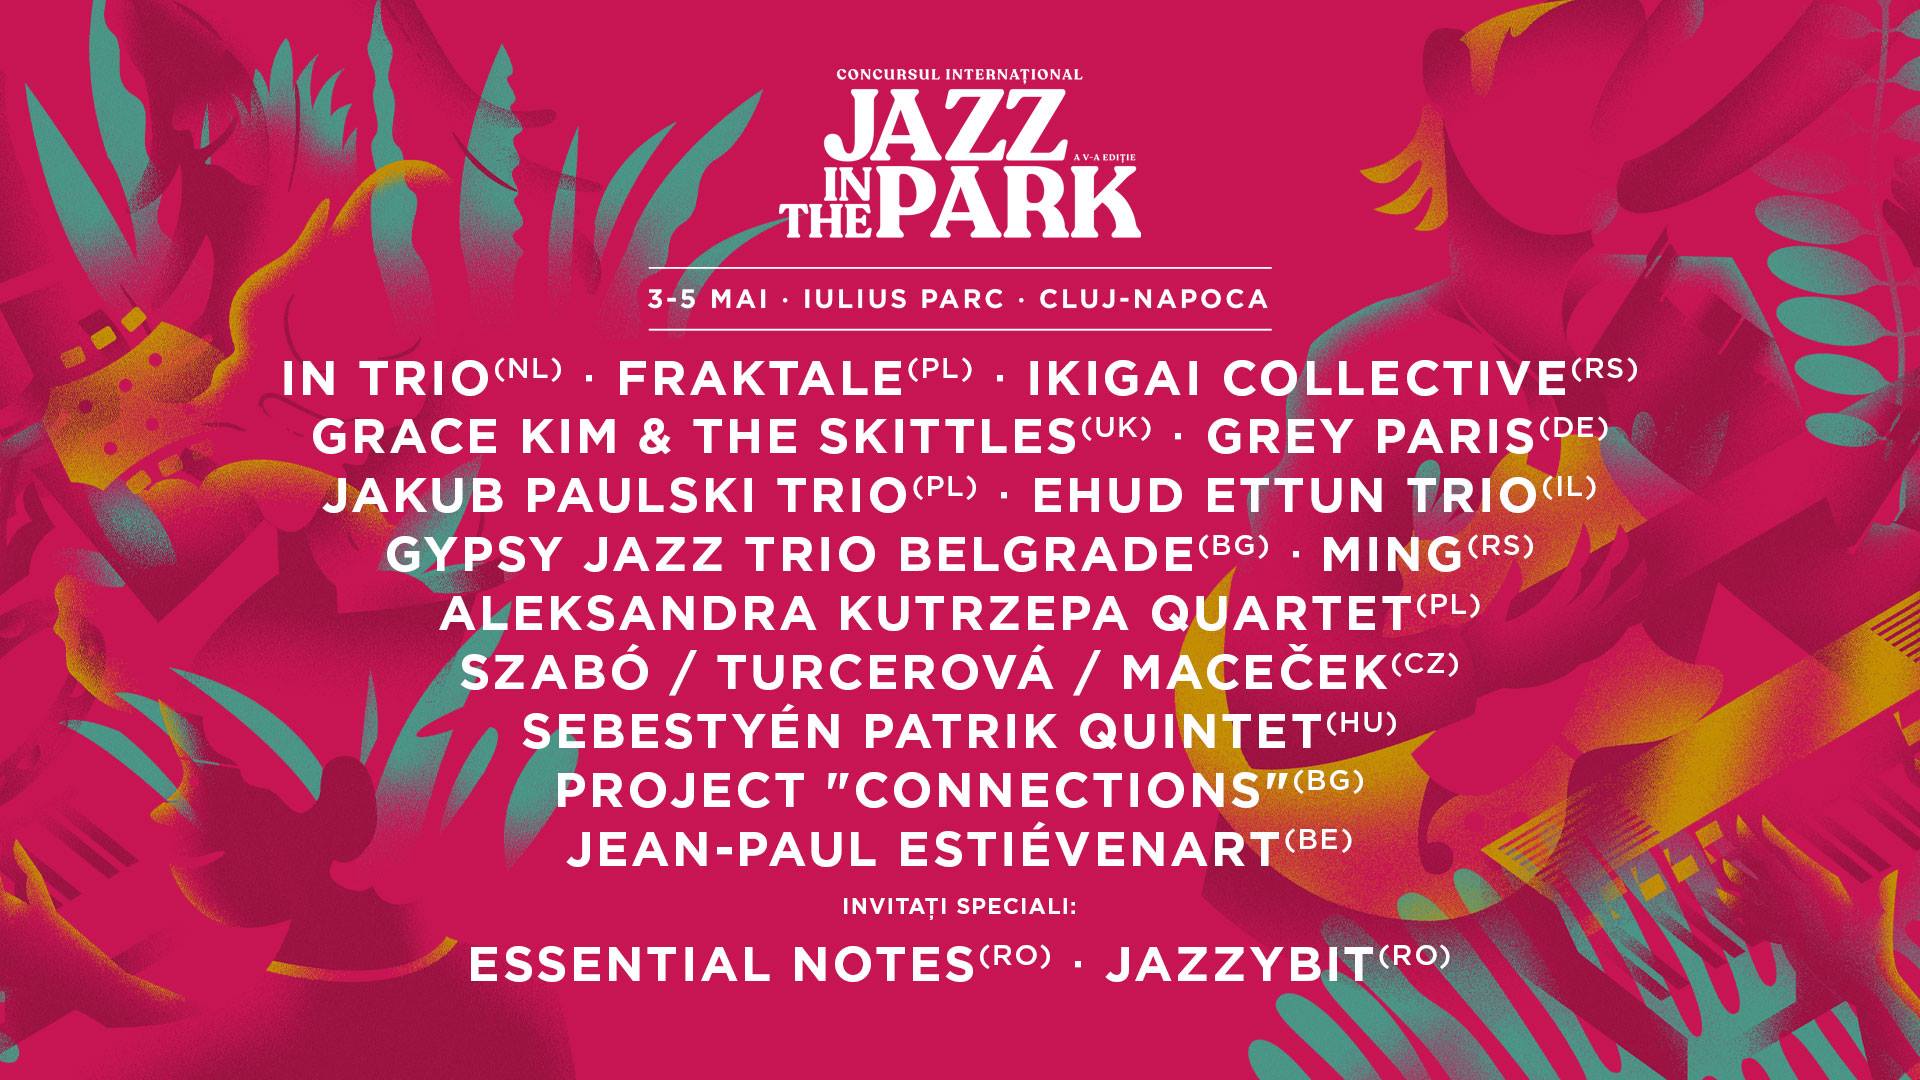 The International Jazz in the Park Competition